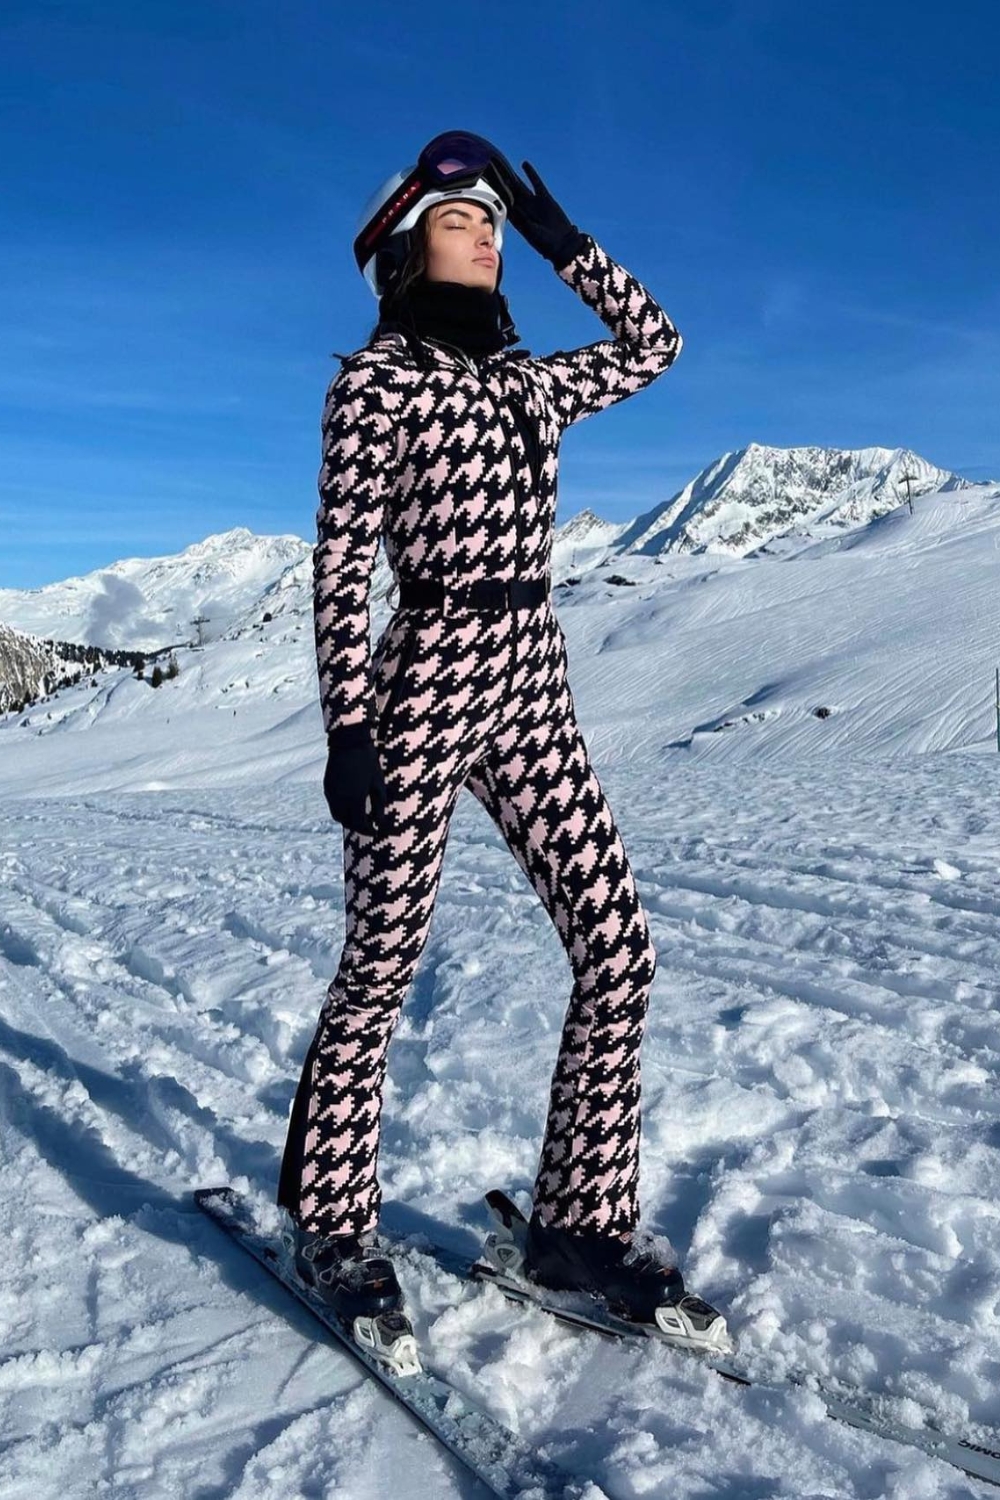 Ski Outfit Ideas - With Patterned Ski Suit